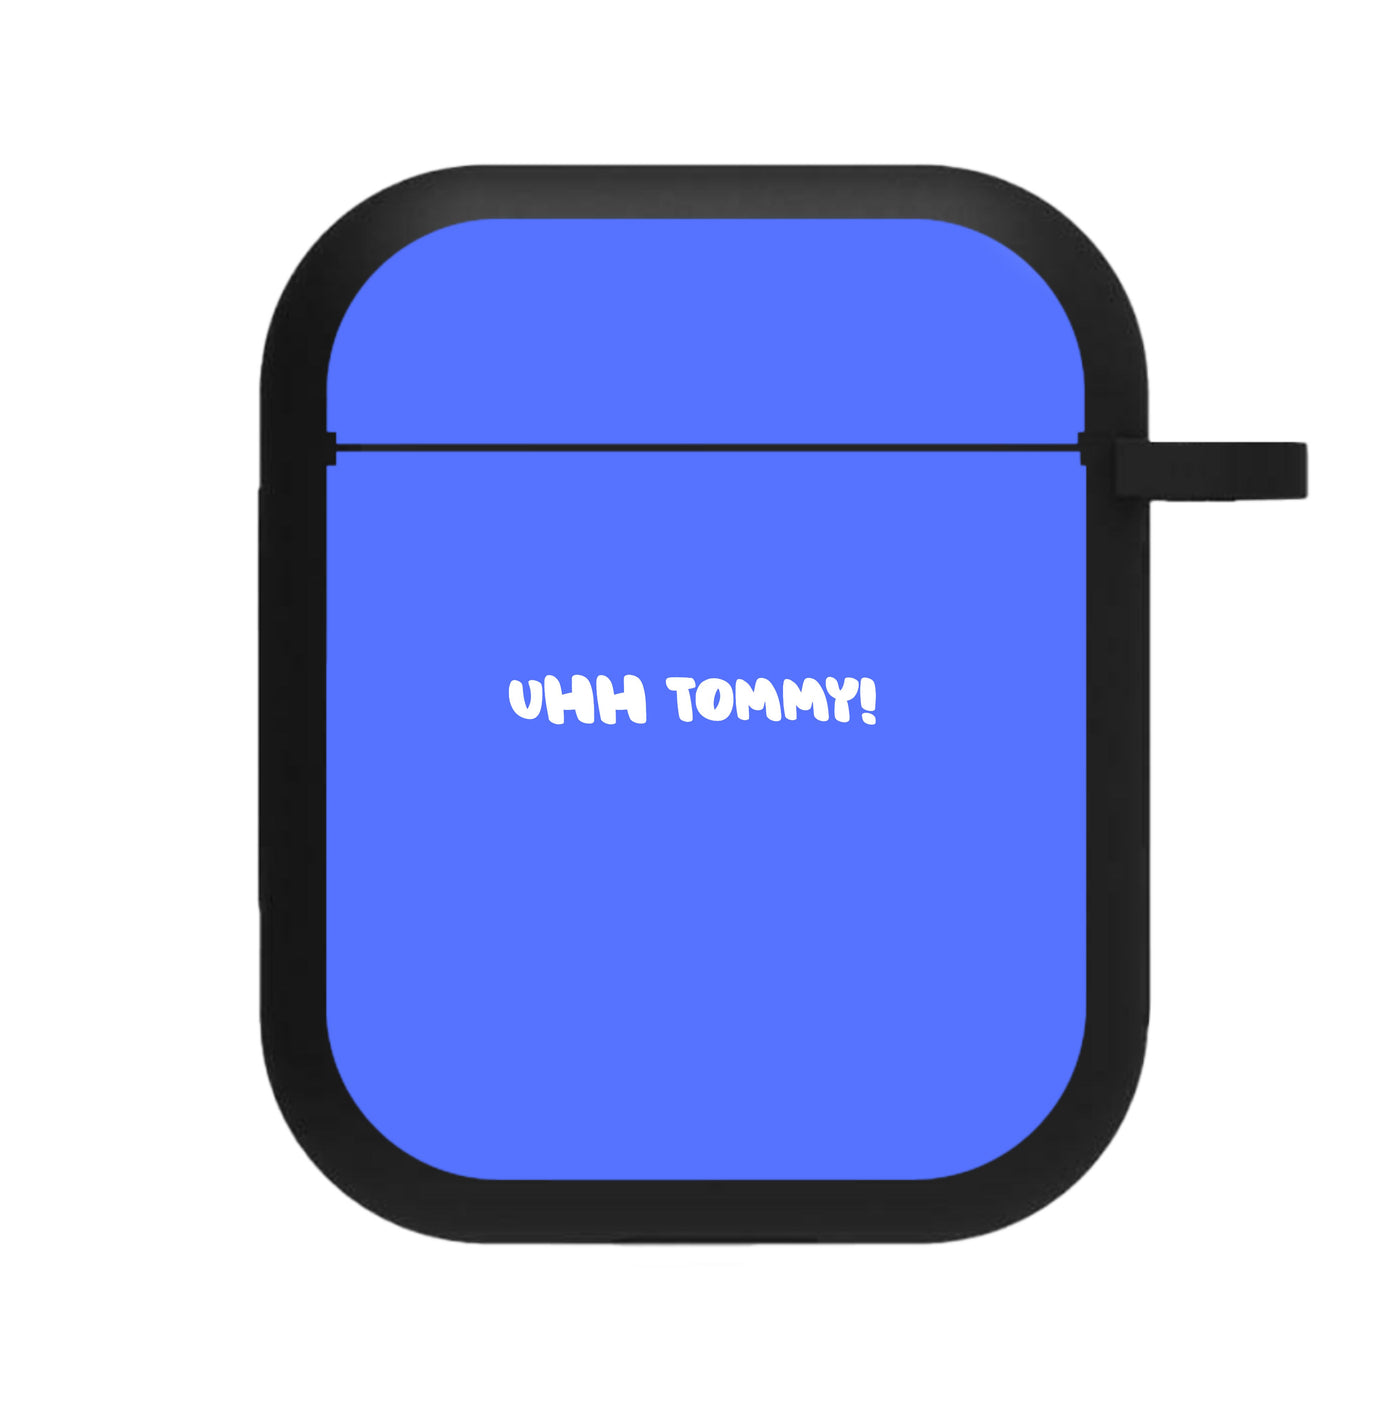 Uhh Tommy! - Islanders AirPods Case